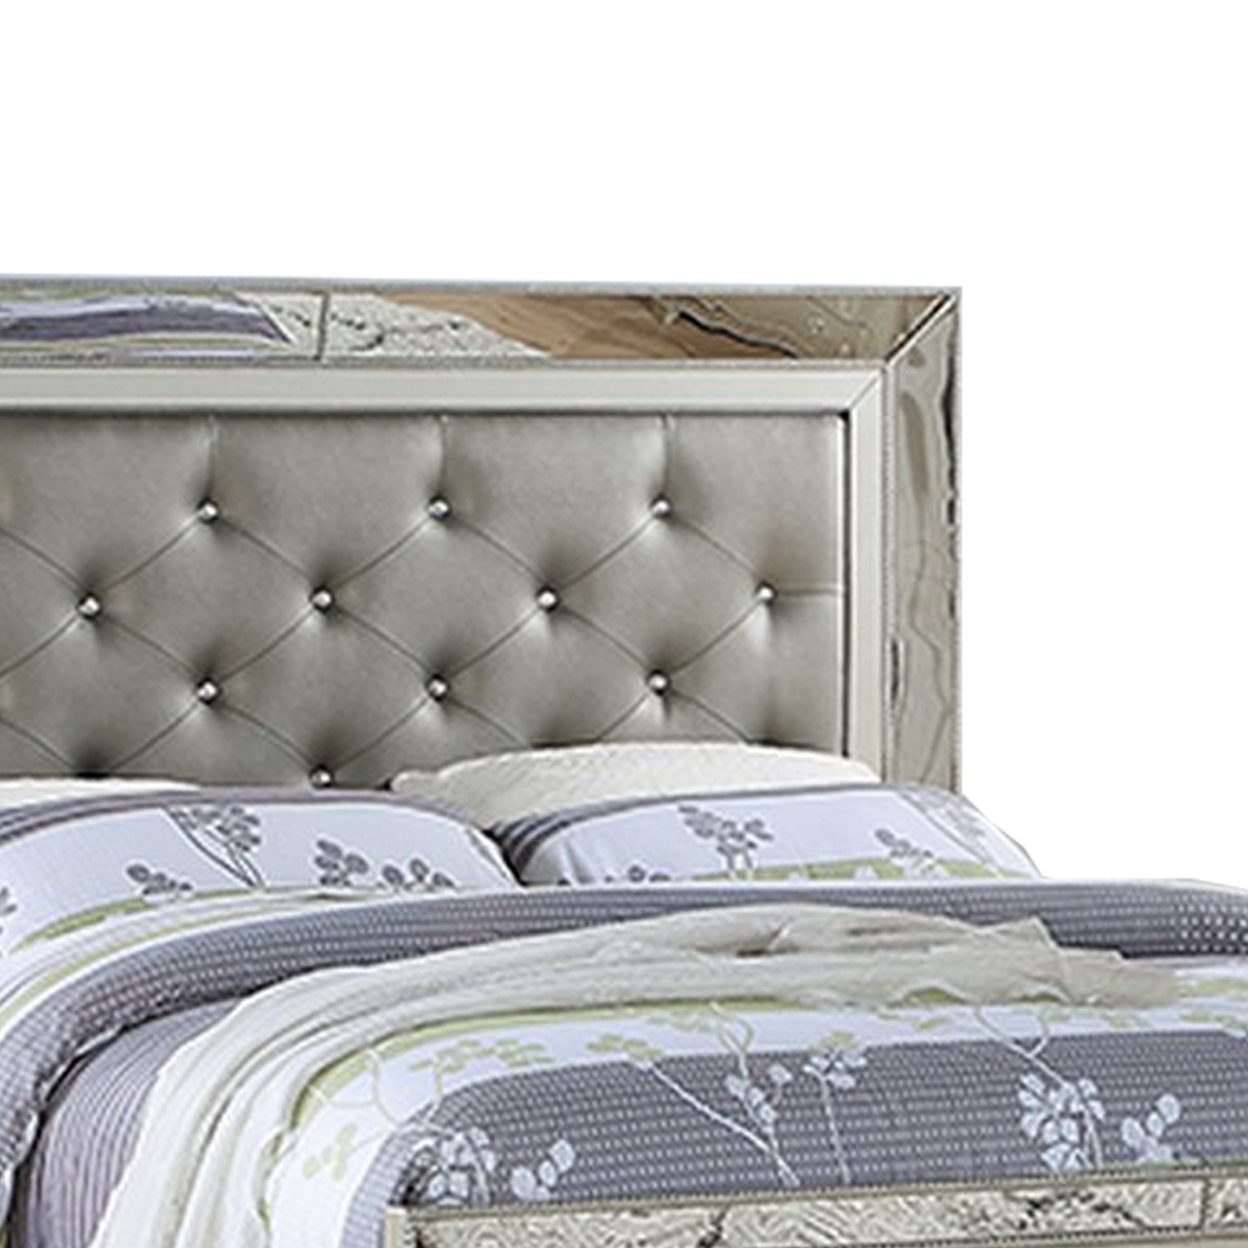 Reva Queen Bed, Mirror Inlaid, Button Tufted Gray Faux Leather Upholstery- Saltoro Sherpi